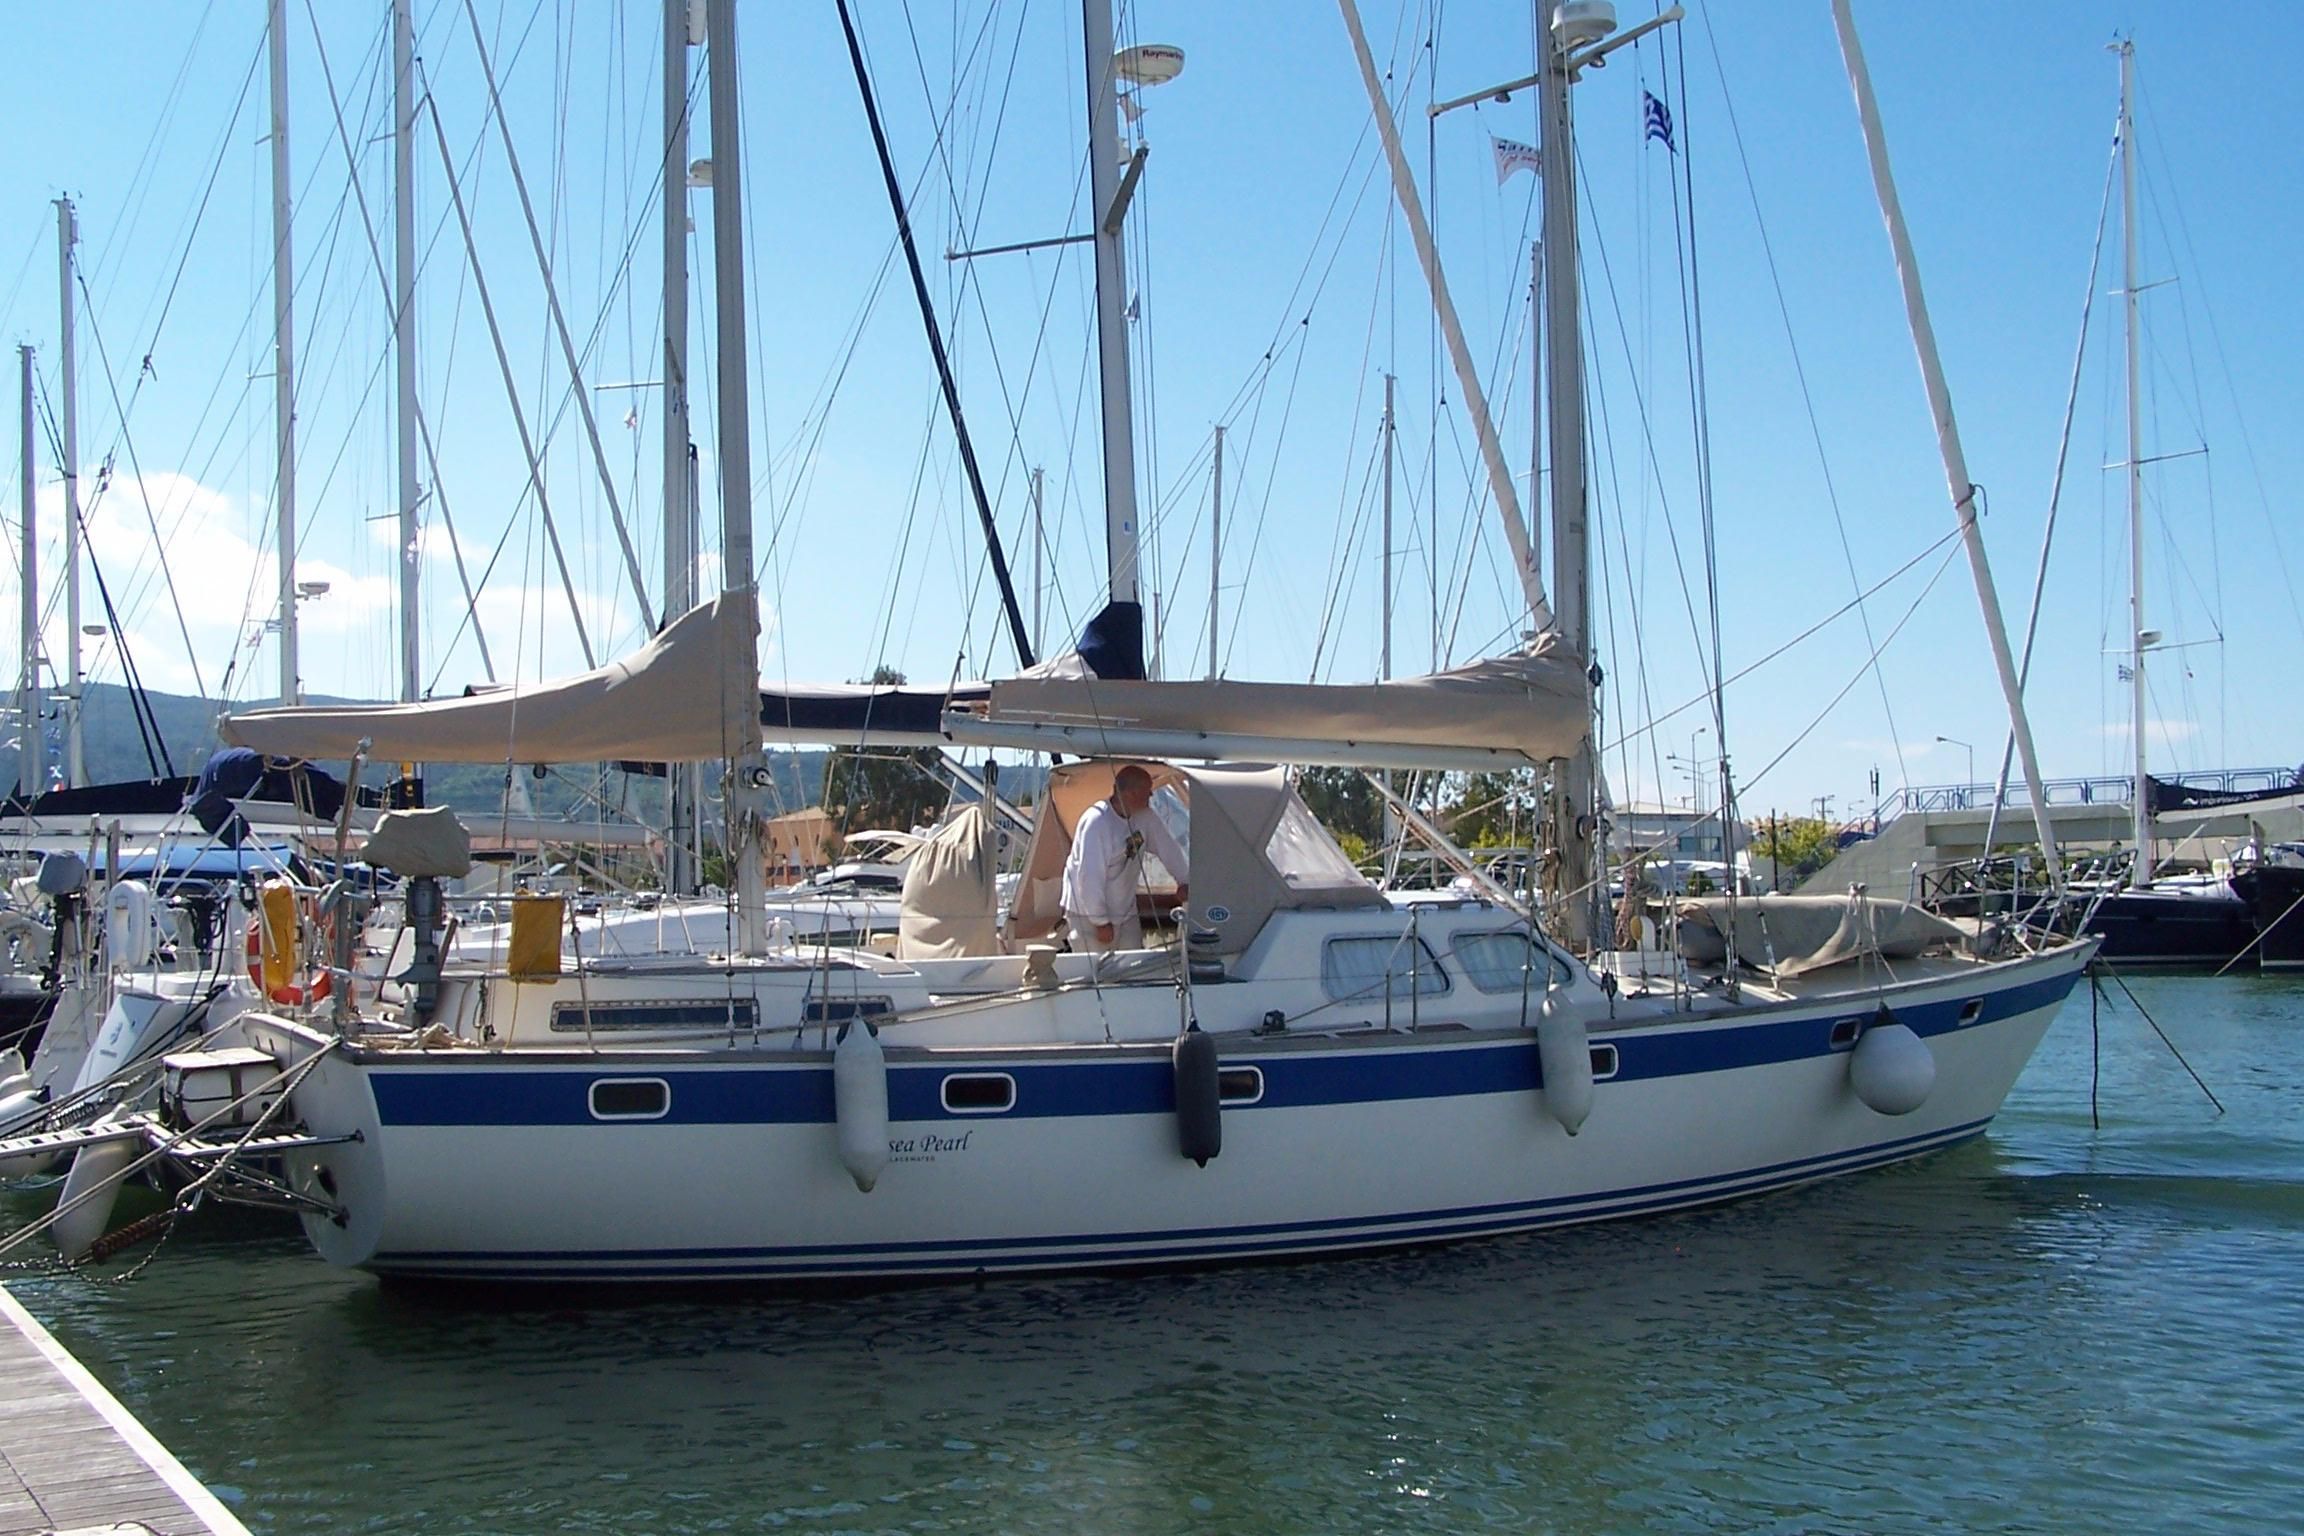 1990 Oyster 46 Ketch Sail Boat For Sale - www.yachtworld.com